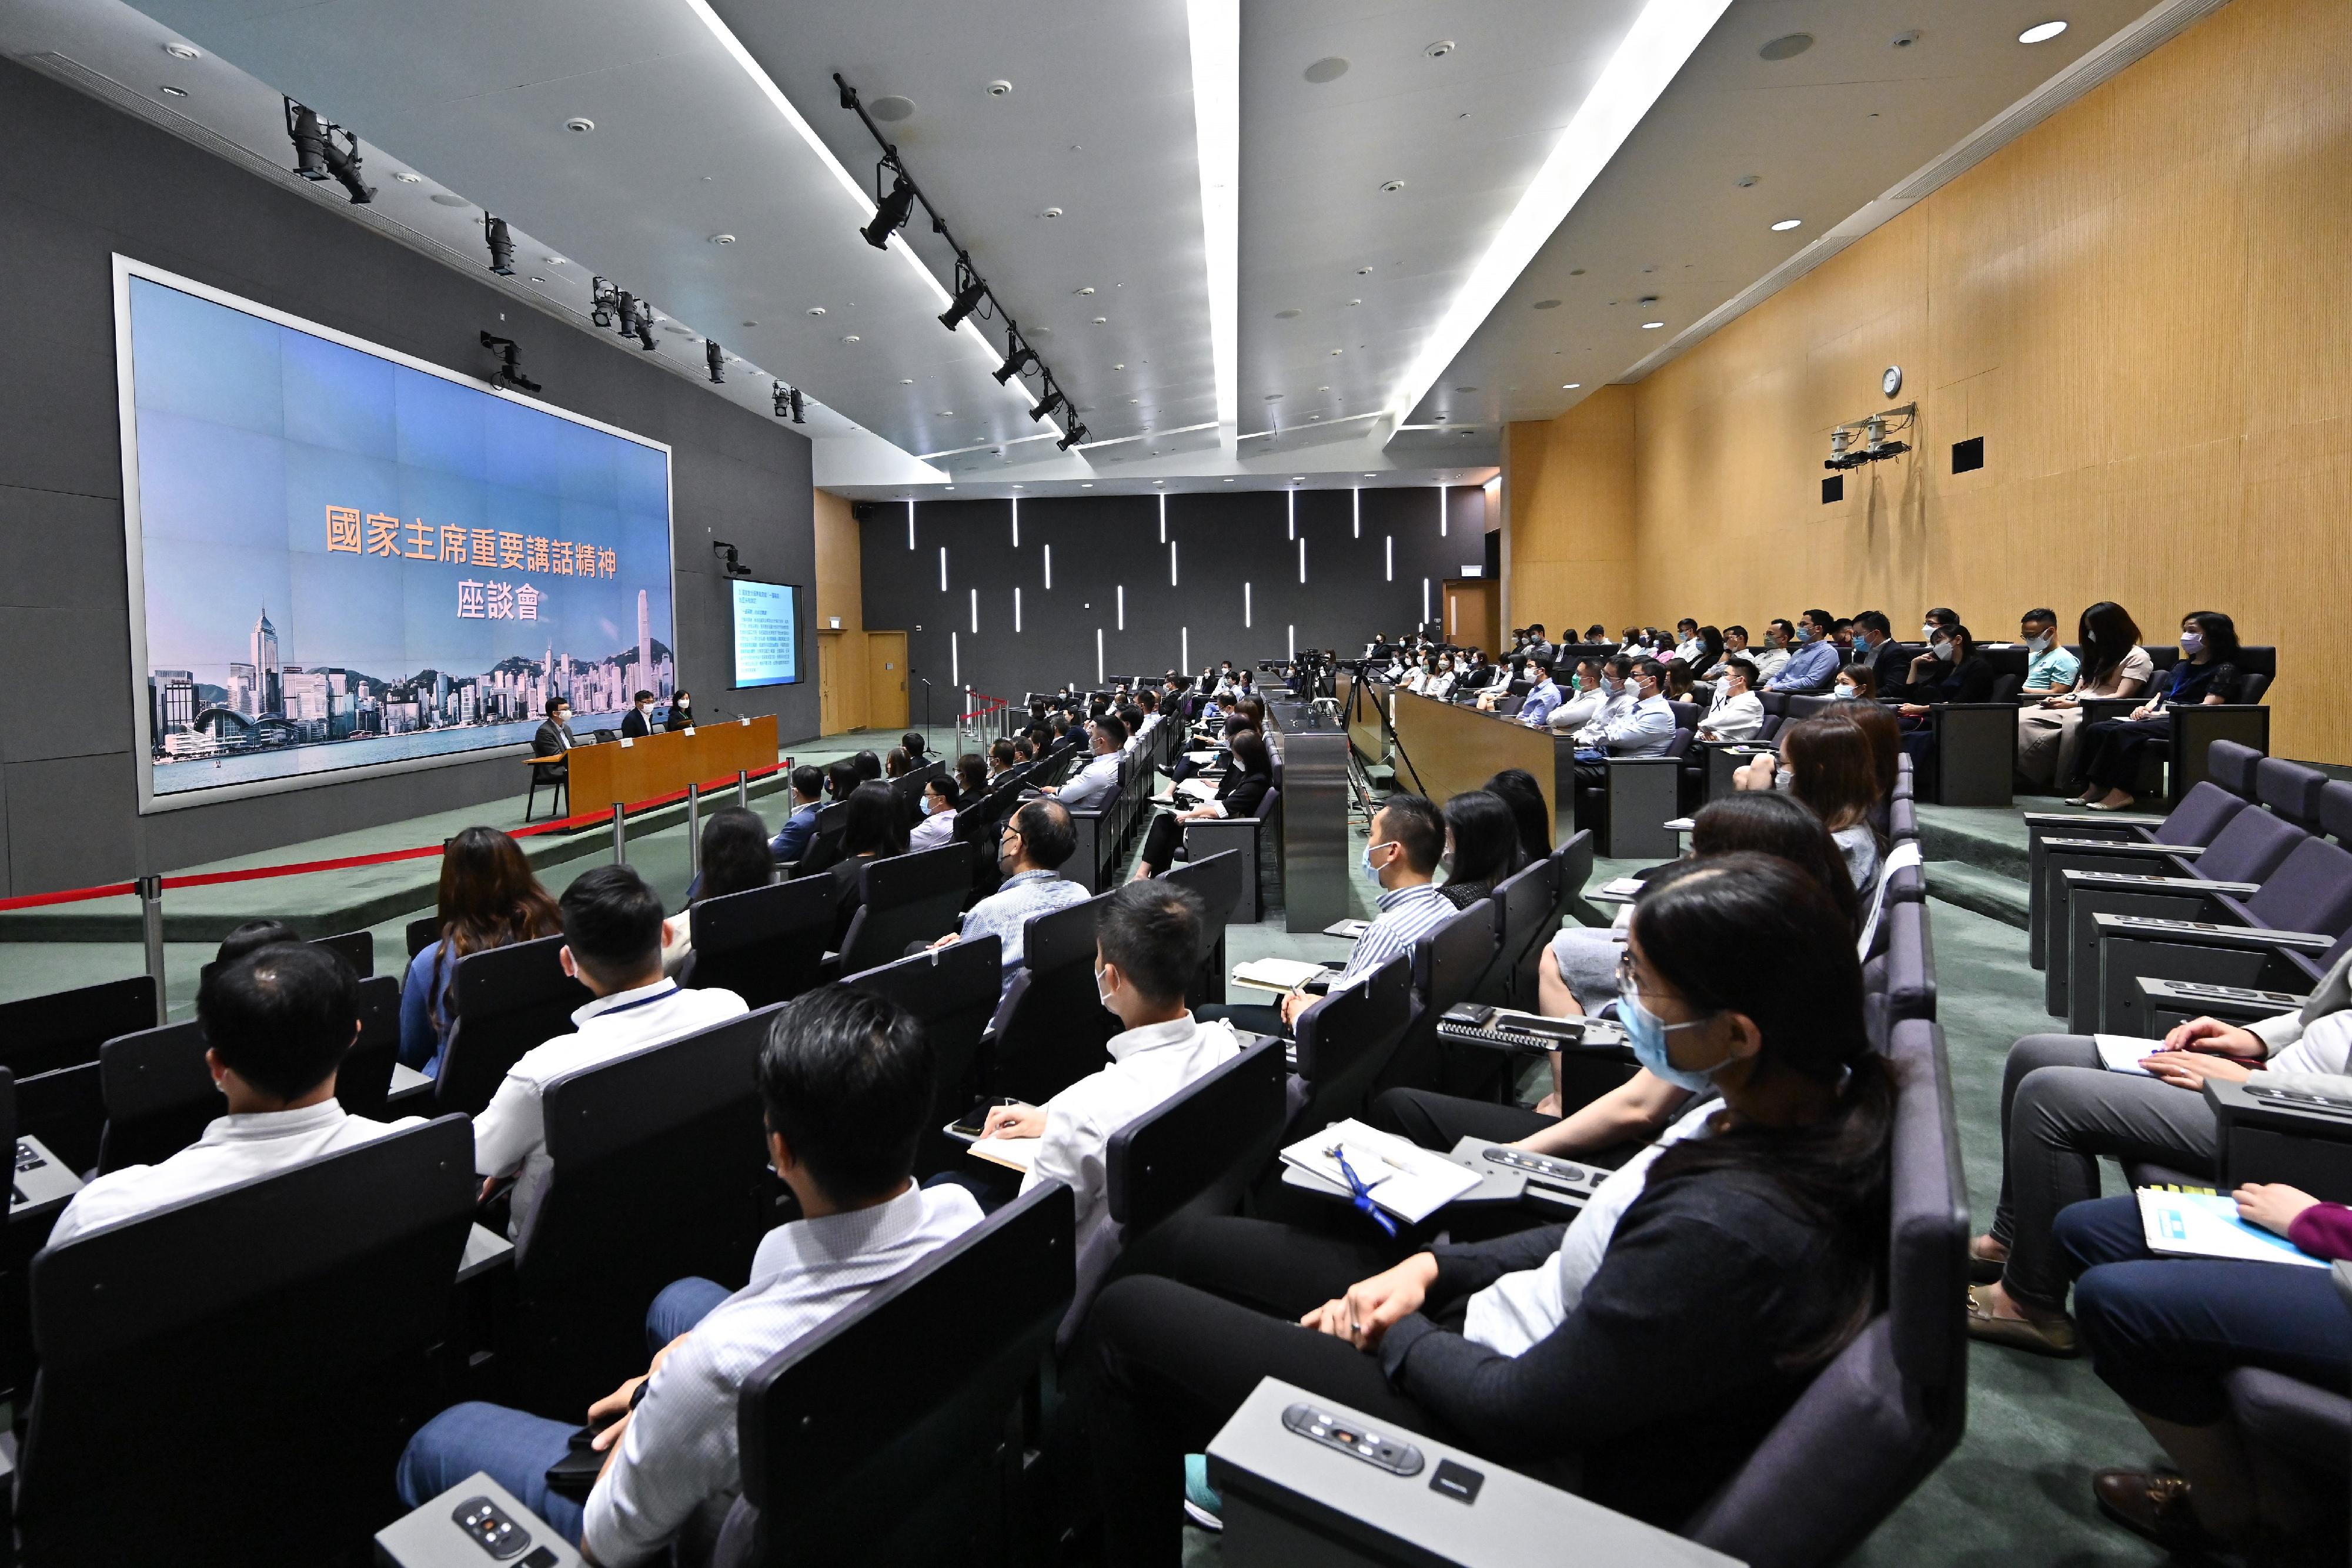 The Transport and Logistics Bureau (TLB) today (August 12) held a session on "Spirit of the President's Important Speech" at the Central Government Offices. The session offered participants a deeper understanding of the core essence of the important speech delivered by President Xi Jinping. Around 110 staff from the TLB and its departments, including the Civil Aviation Department, the Highways Department, the Marine Department and the Transport Department, attended the session.  